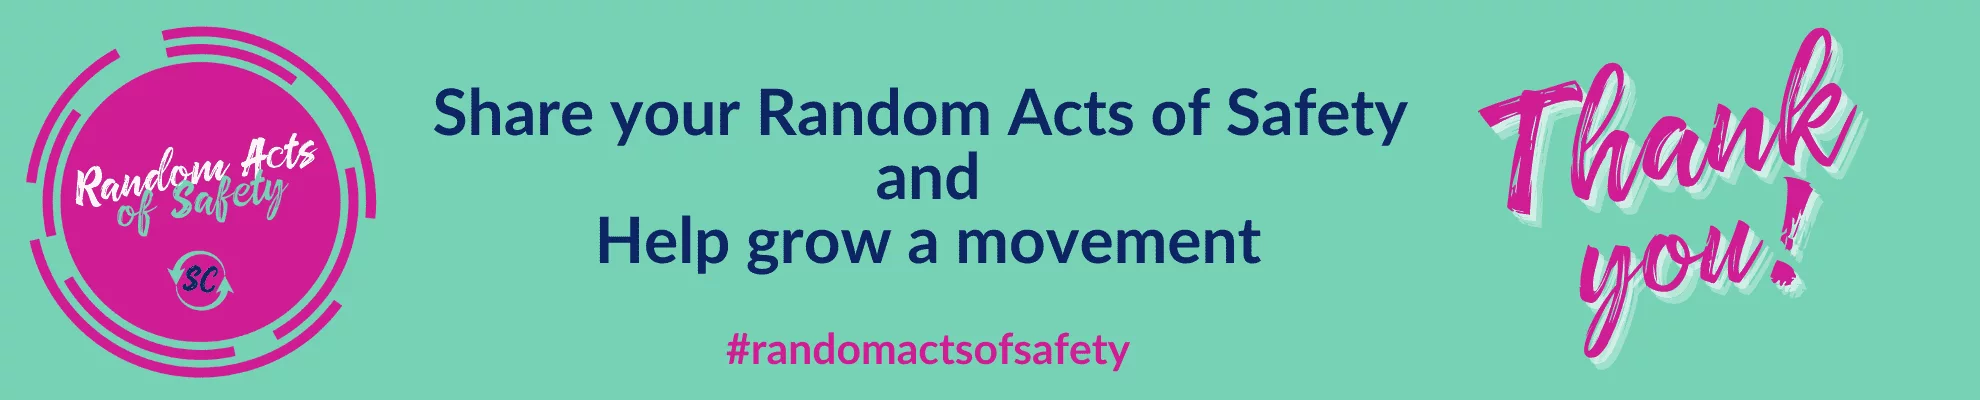 Share your Random Acts of Safety Banner